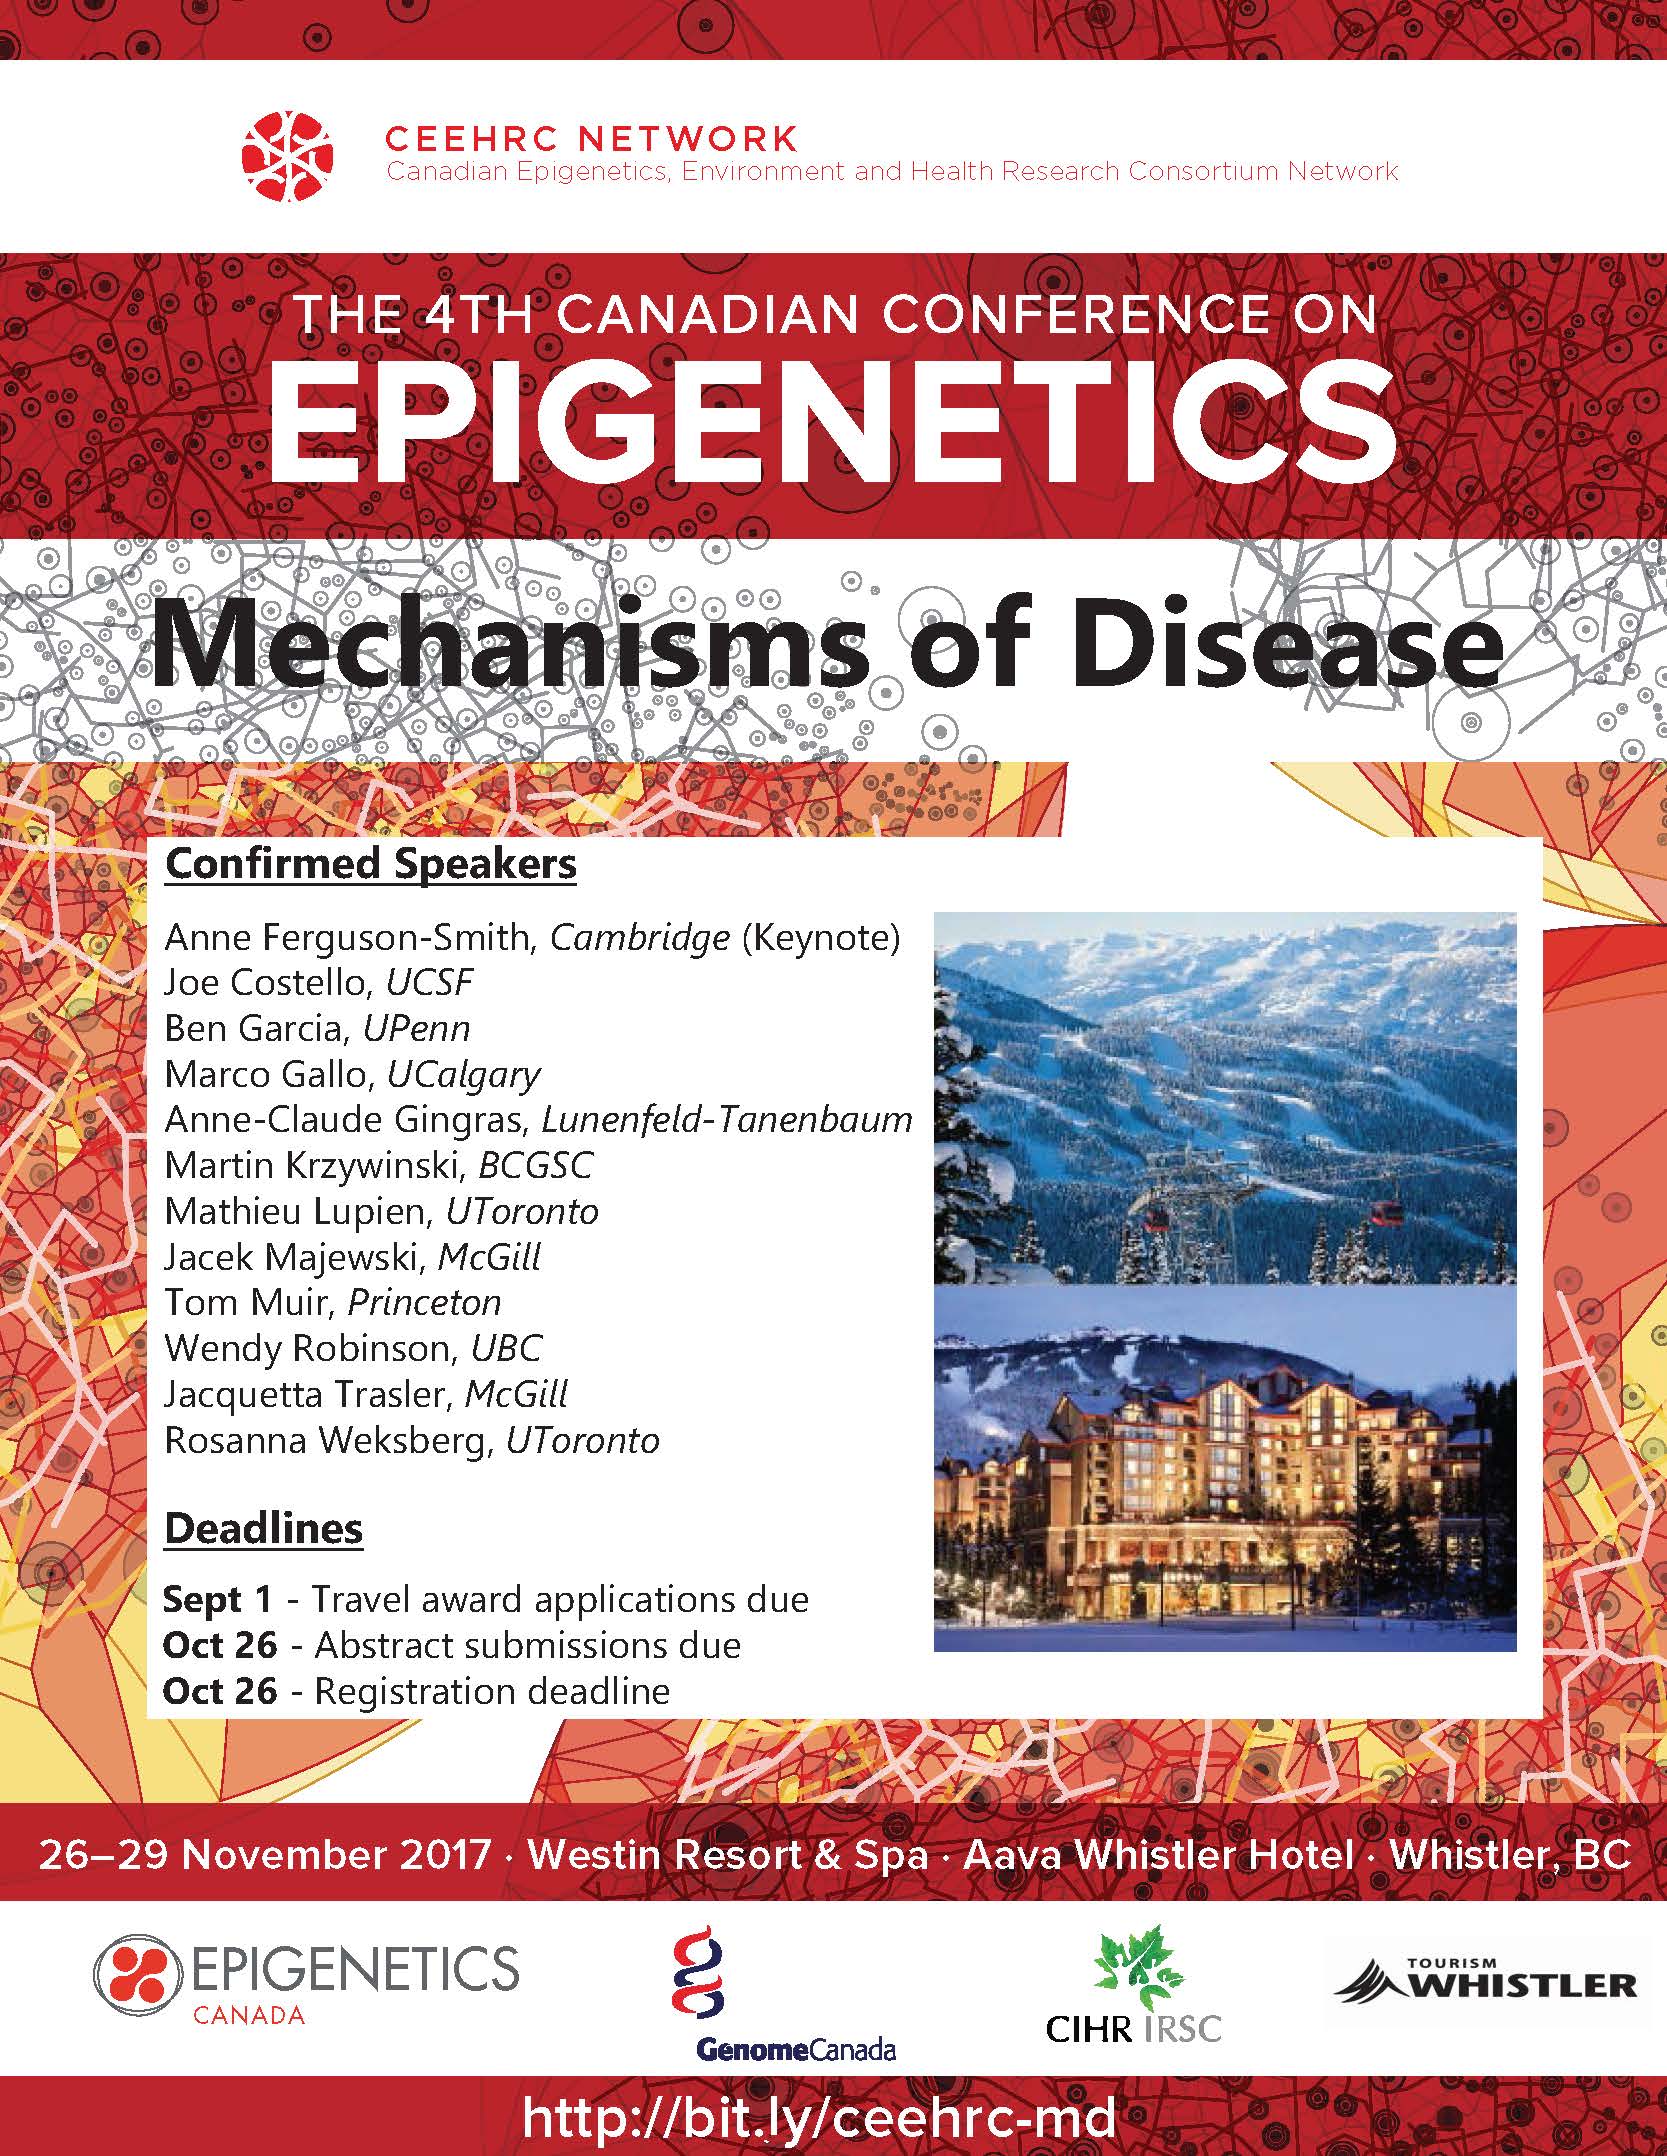 4th Canadian Conference on Epigenetics: Mechanisms of Disease - Whistler, British Columbia from November 26-29, 2017